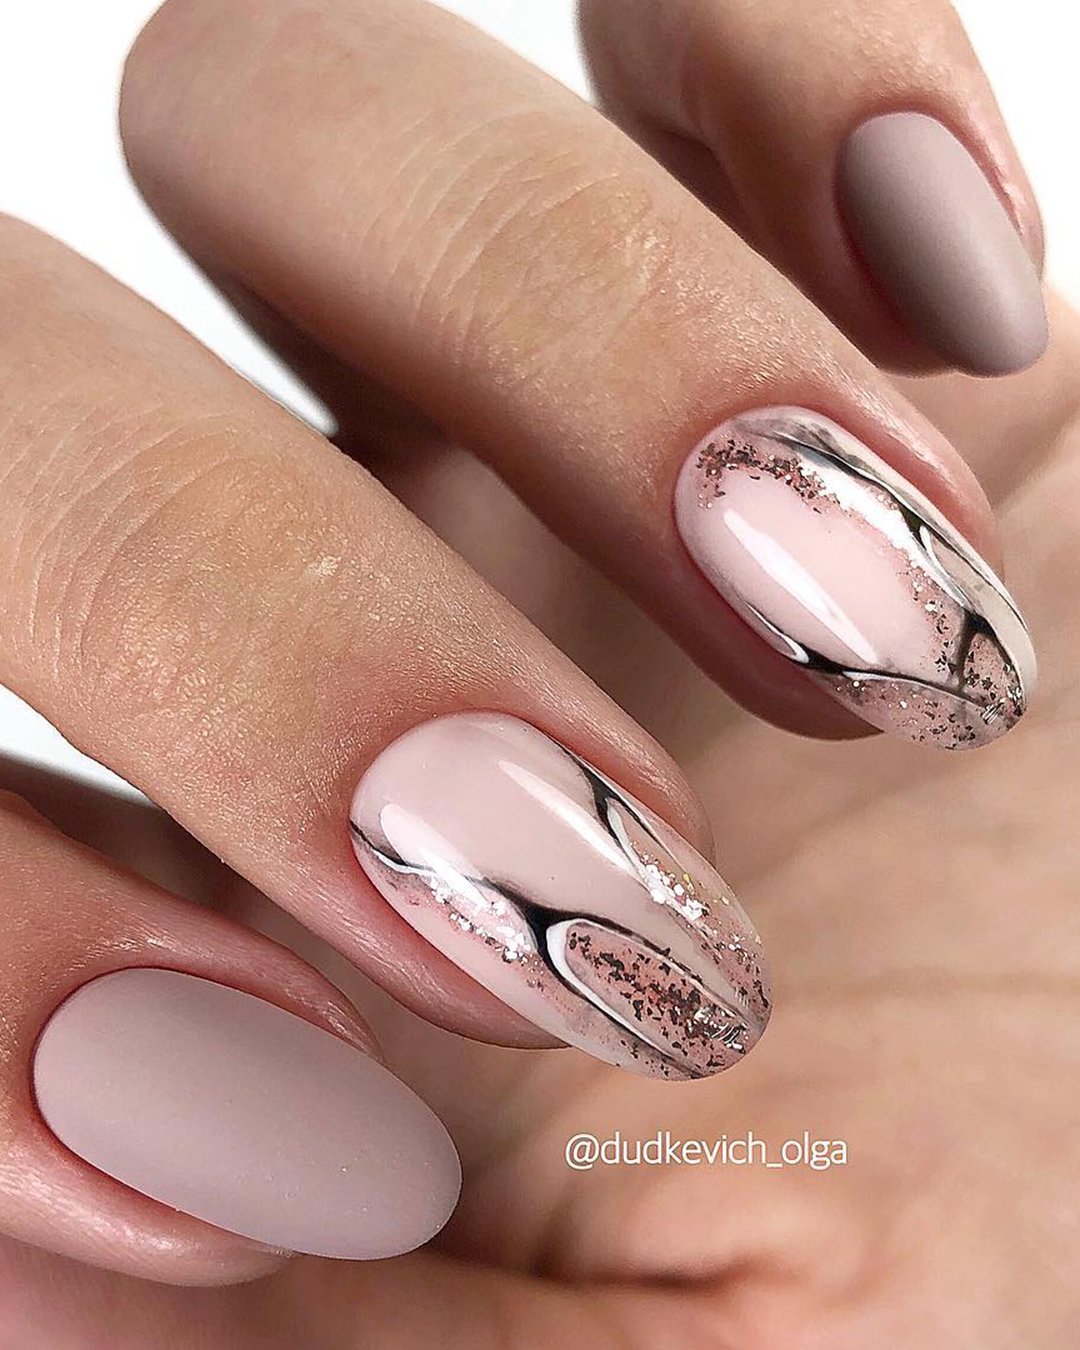 wedding nails design nude pink with golden stripes dudkevich_olga